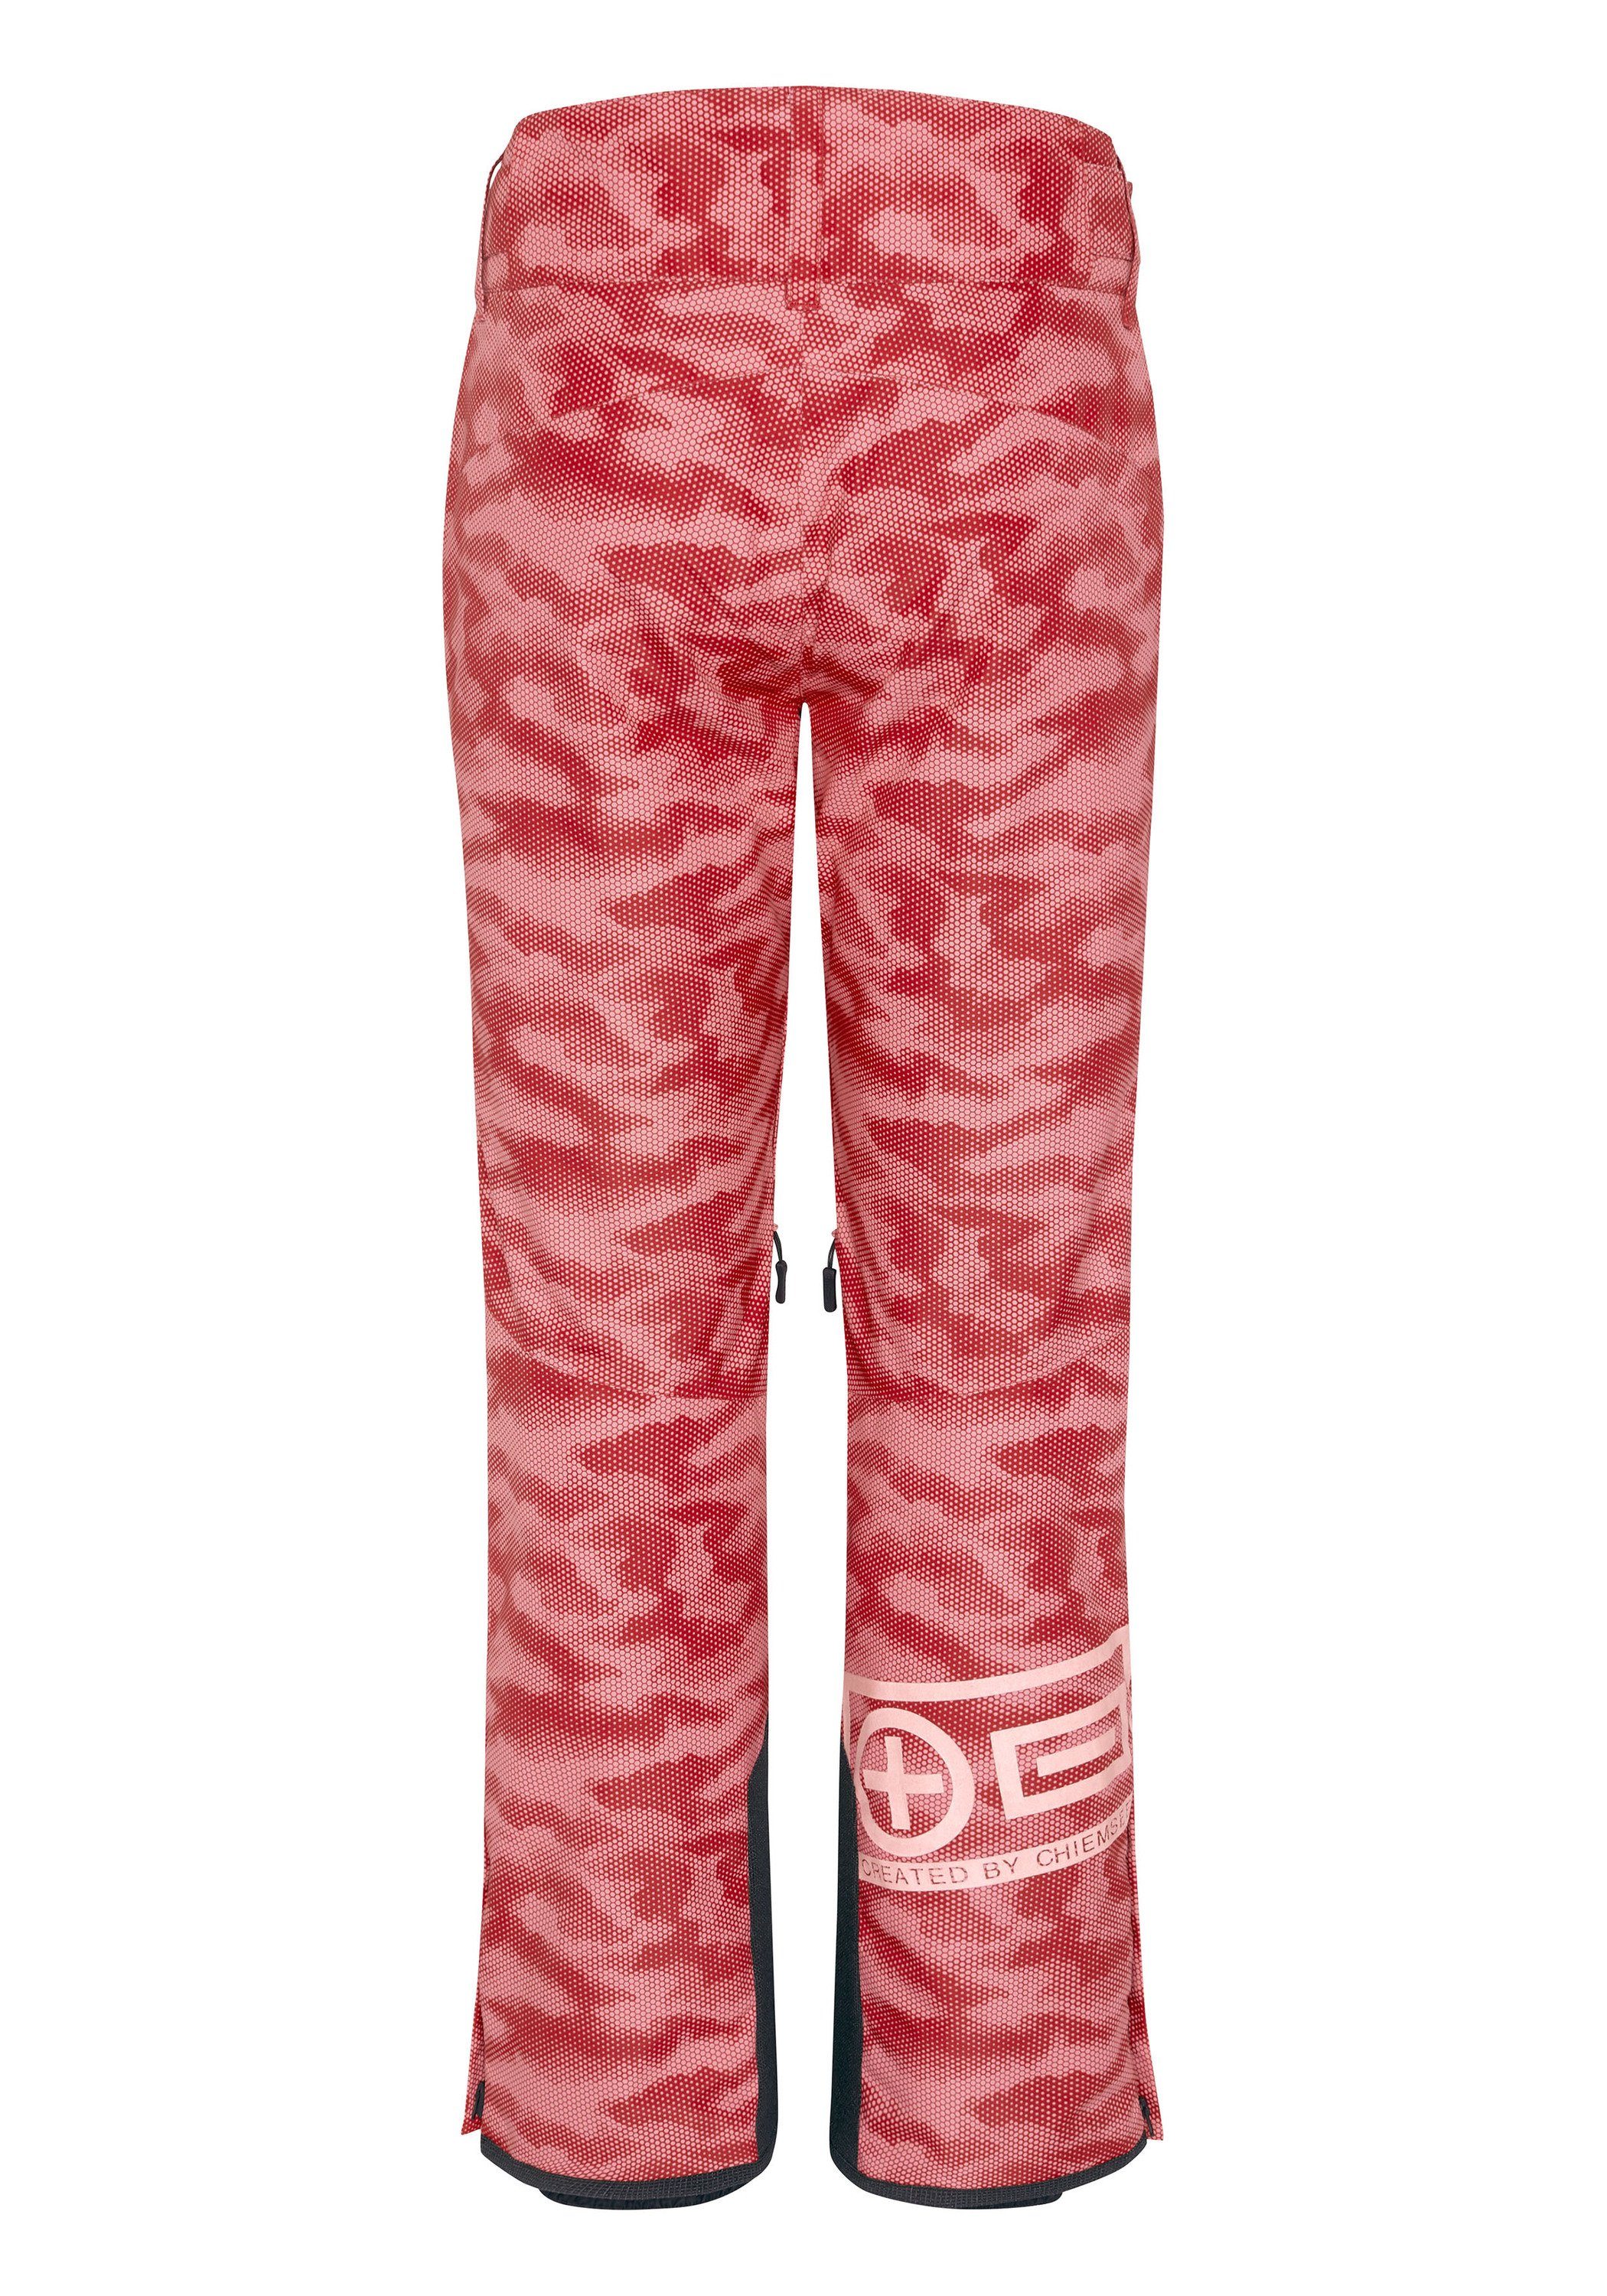 Sporthose 1 Allover-Muster Chiemsee mit hell Slim-Fit Skihose rosa/rosa